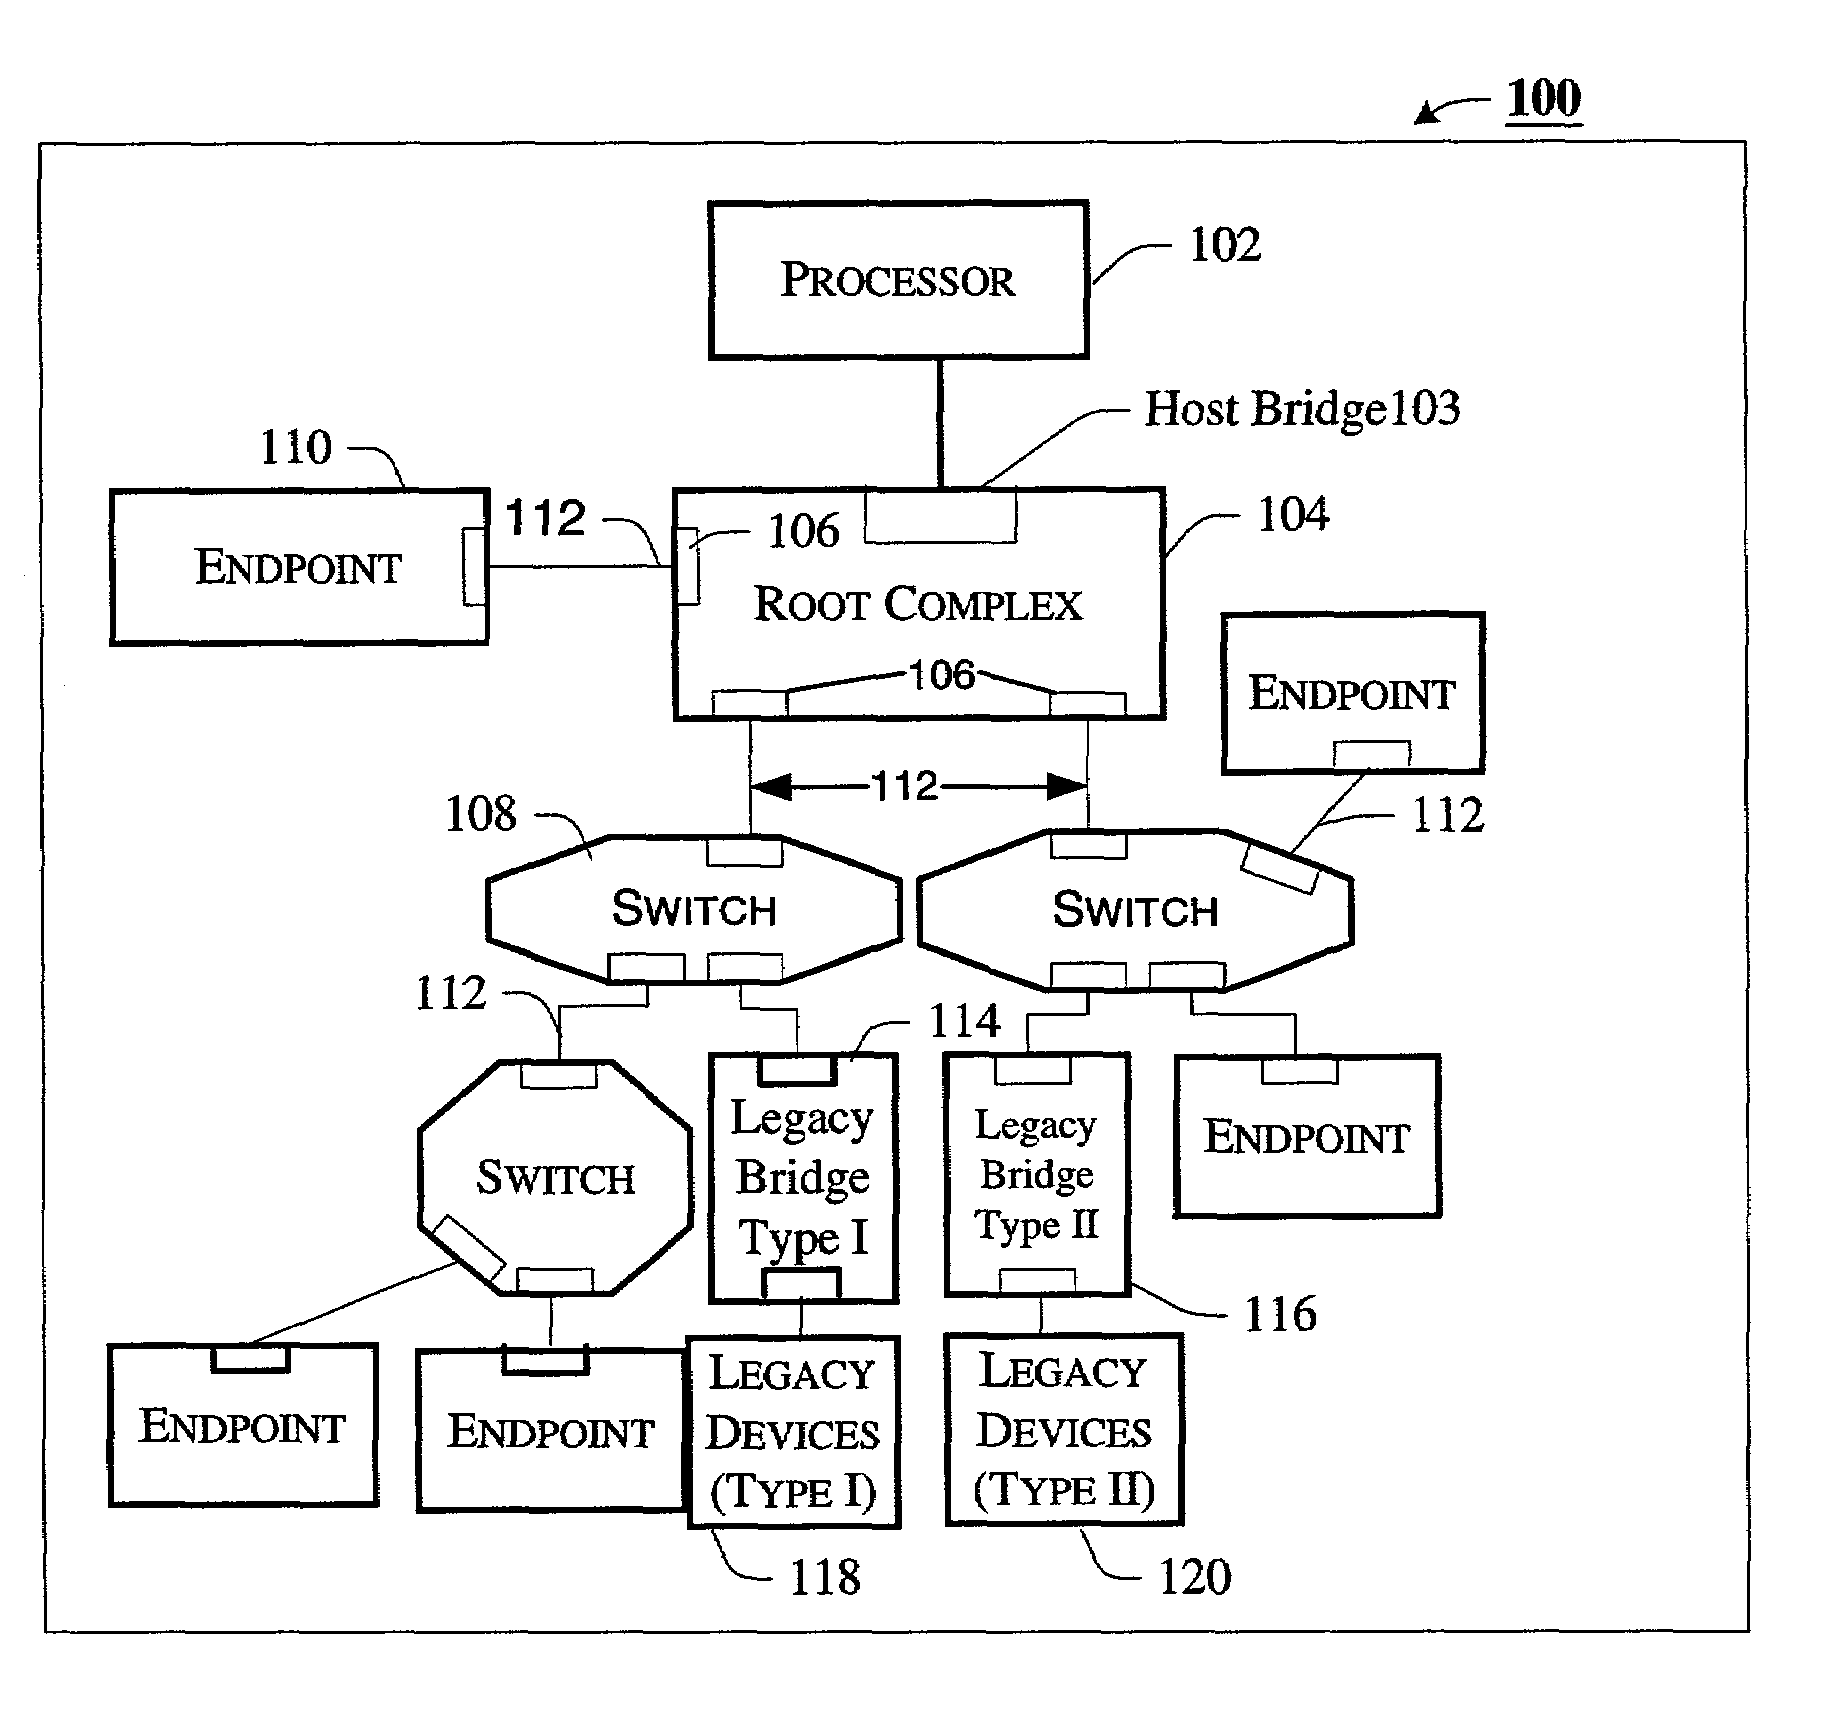 Communicating message request transaction types between agents in a computer system using multiple message groups